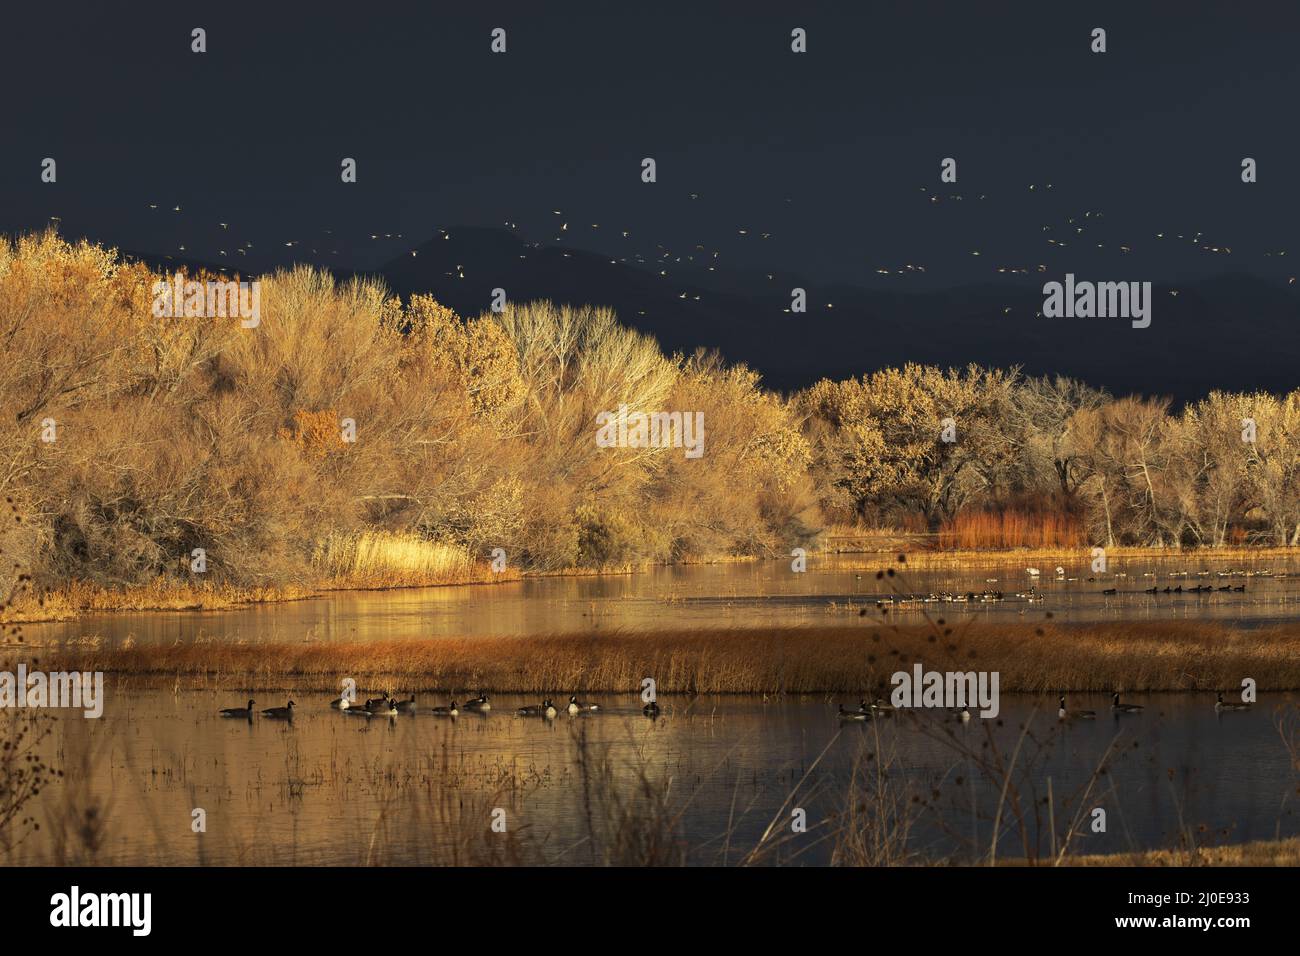 Beauty of New Mexico sunrise seen in golden glow accented by distant bird flocks in sky and water of a winter landscape Stock Photo